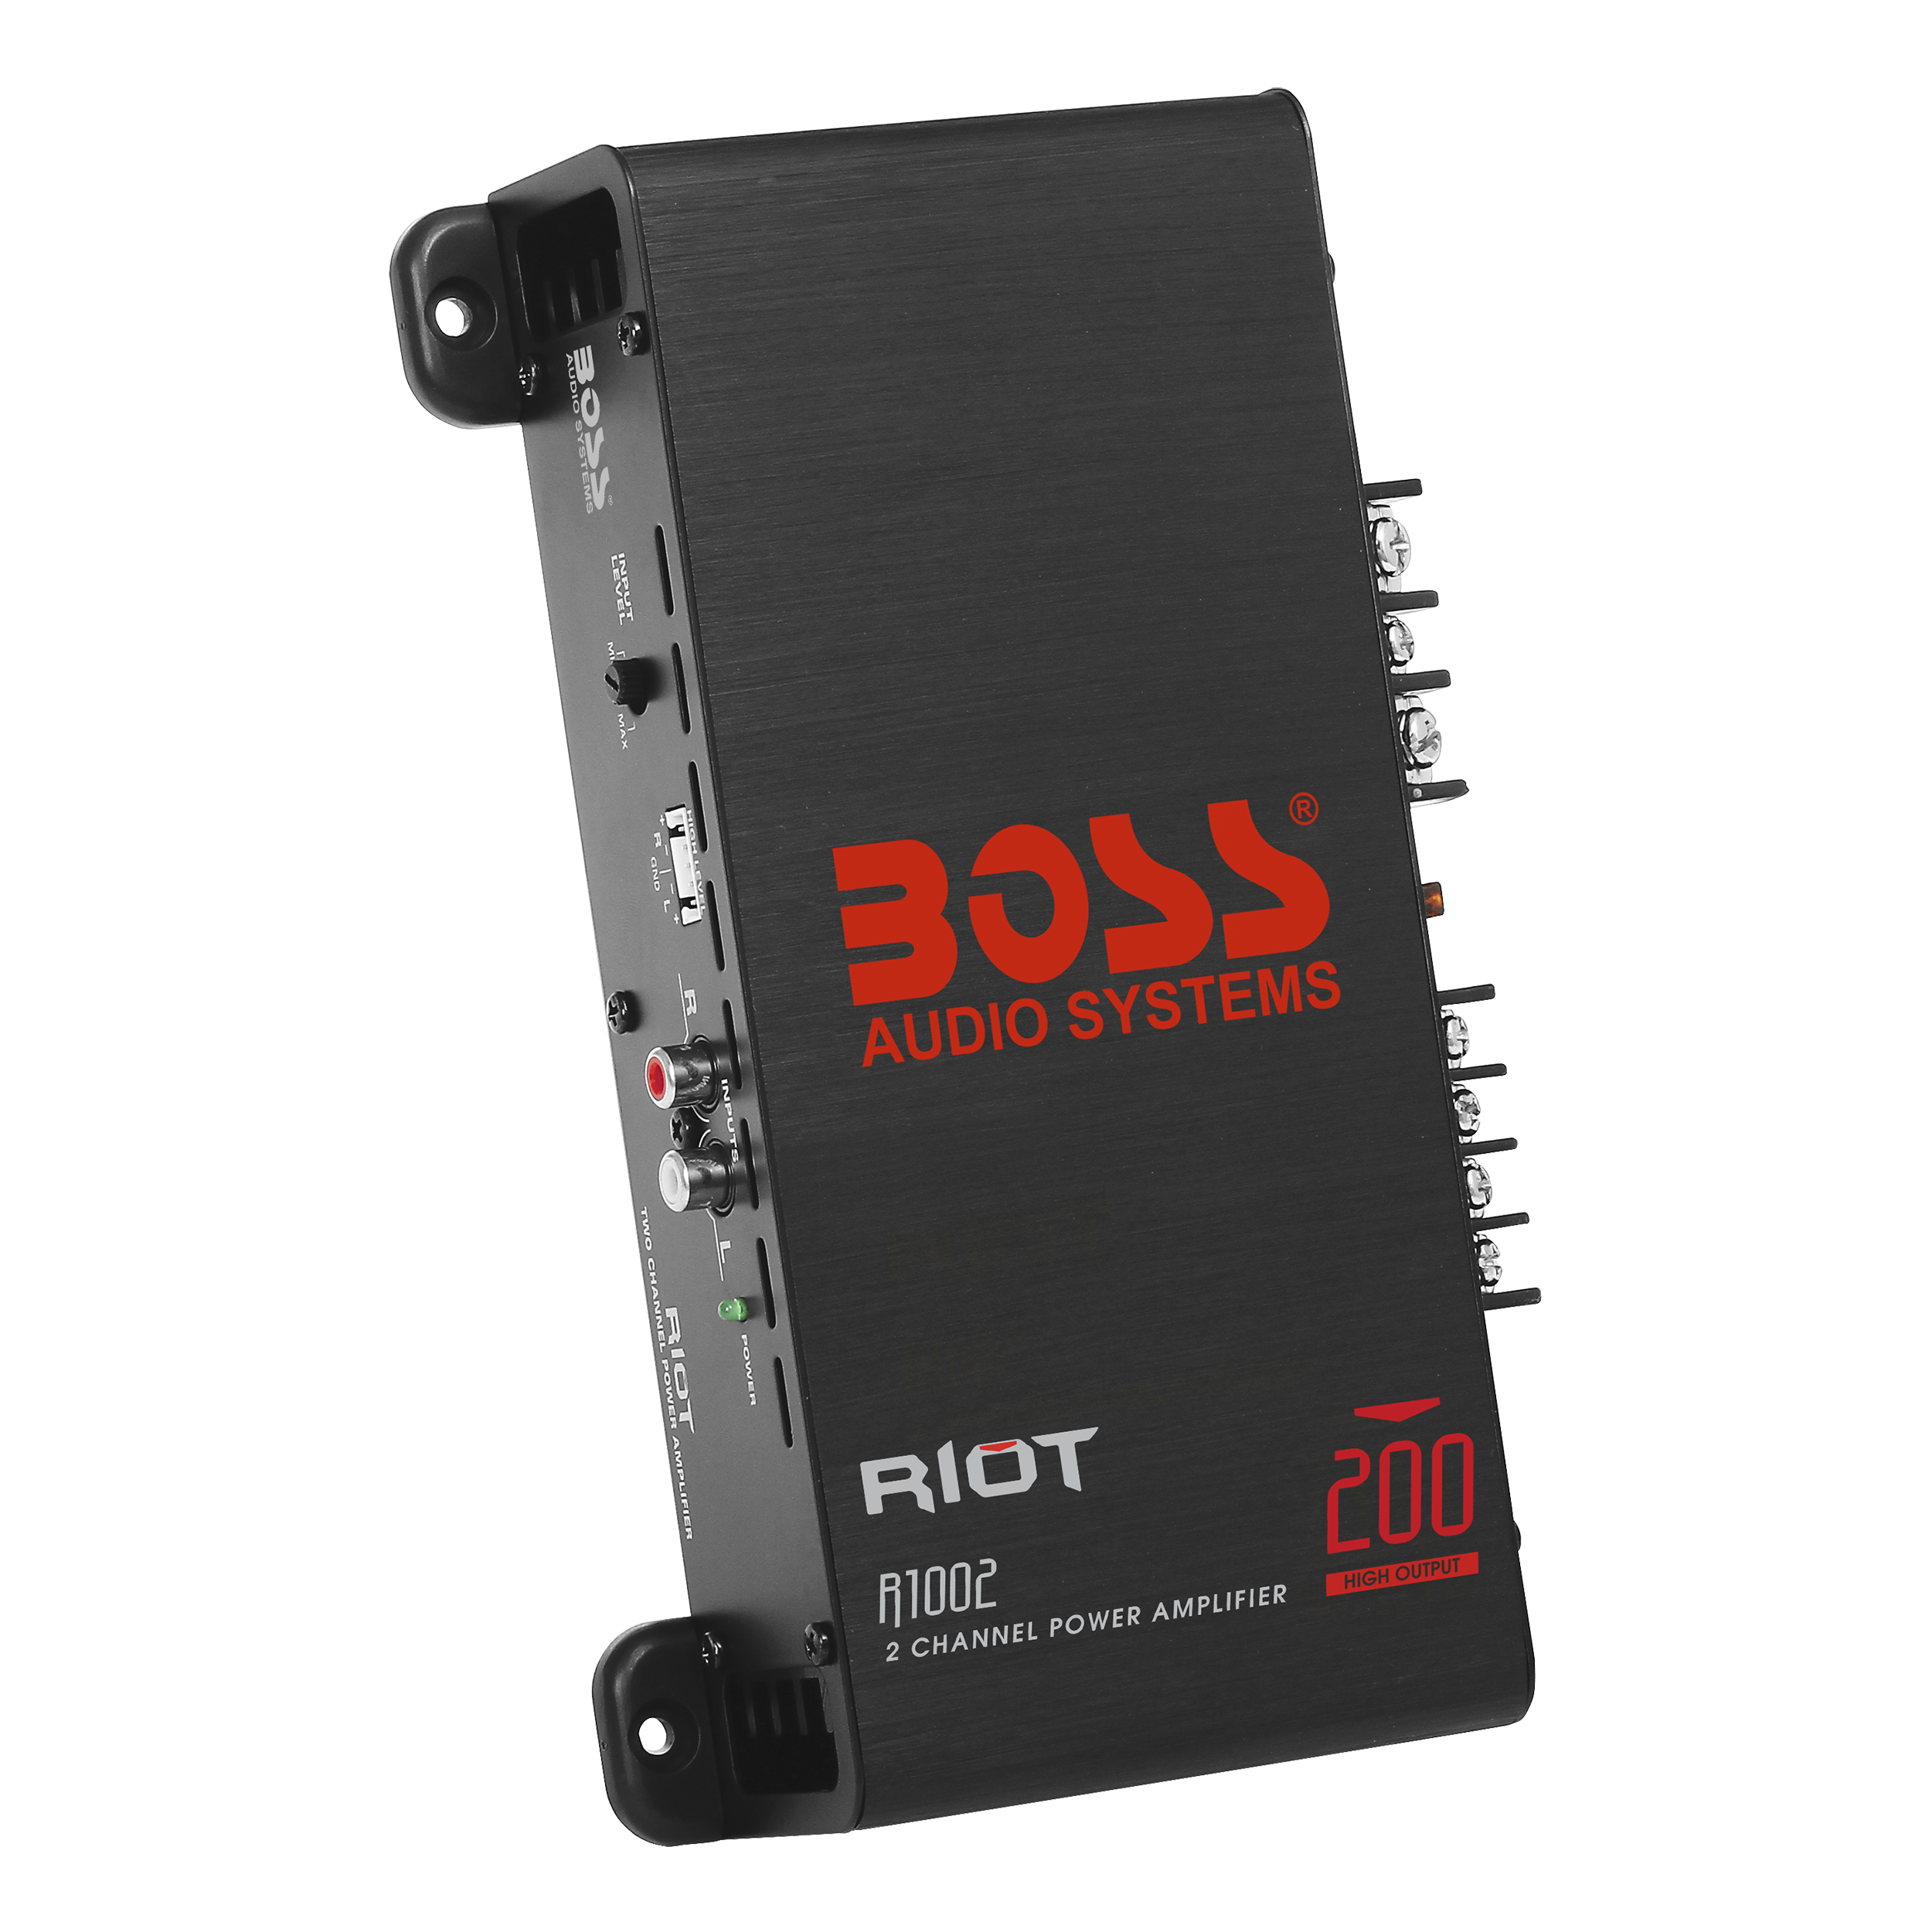 BOSS Audio Systems R1002 Riot Series Car Audio Stereo Amplifier - 200 High Output, 2 Channel, Class A/B, 2/4 Ohm Stable, Low/High Level Inputs, Full Range, Subwoofer - image 1 of 20